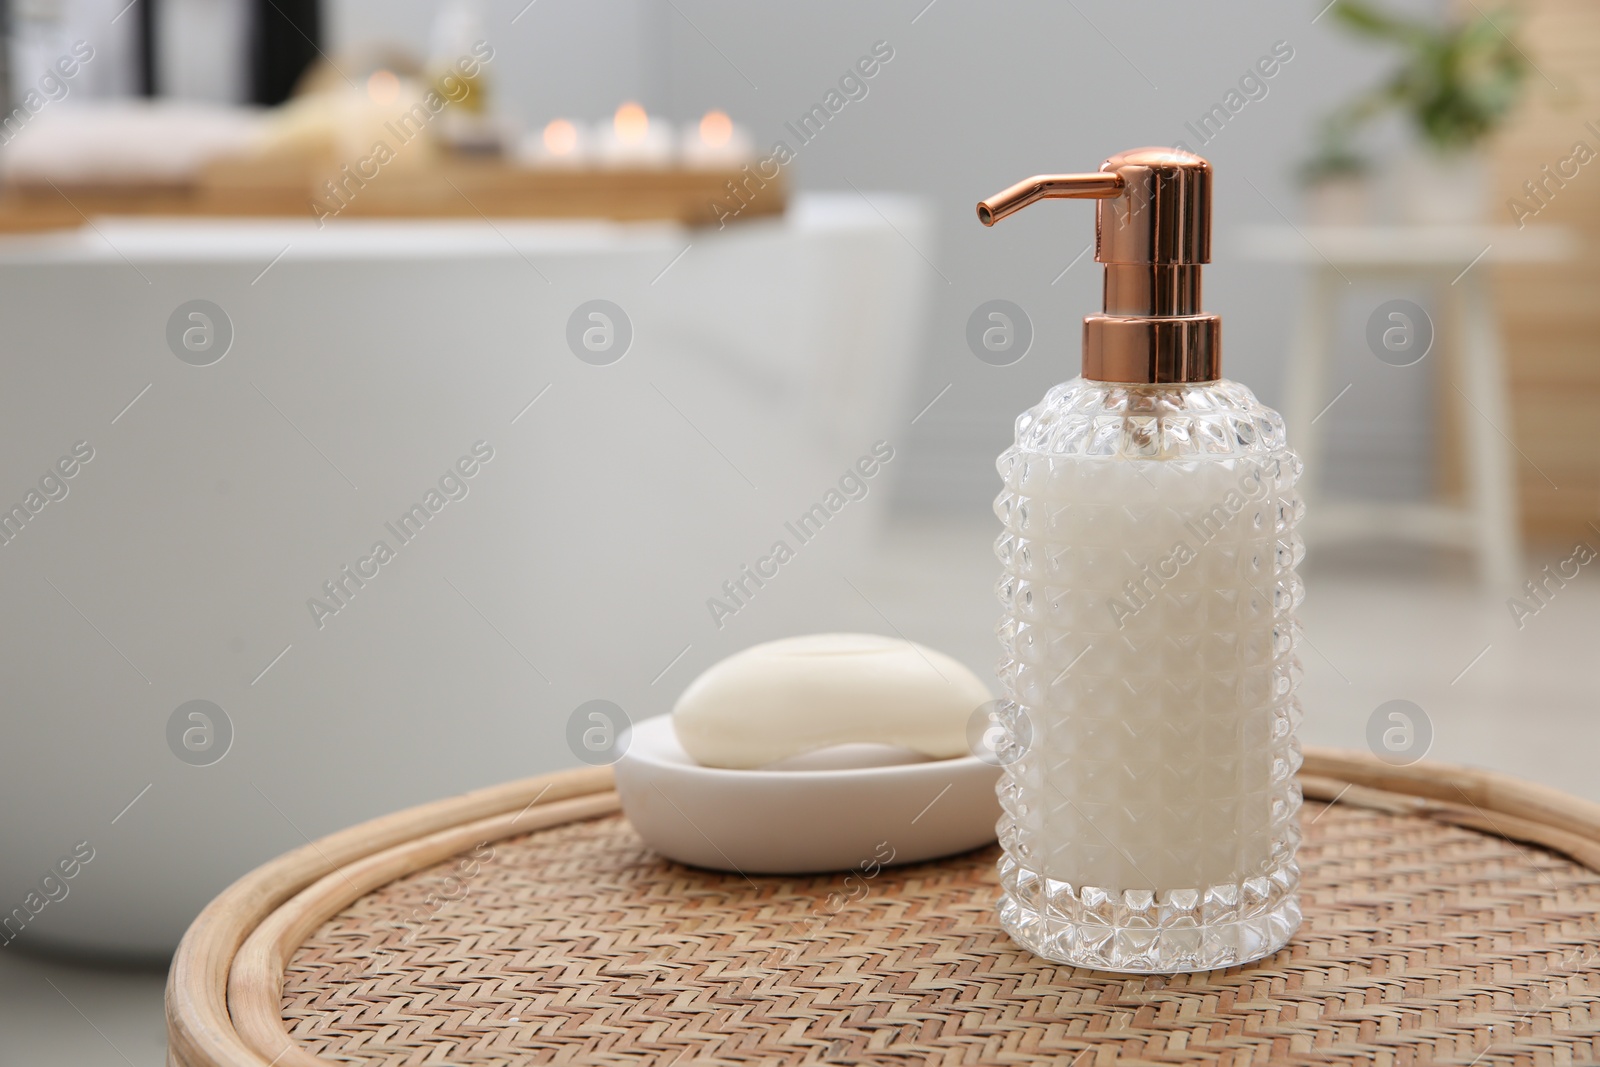 Photo of Stylish glass dispenser and soap bar on wicker stool in bathroom. Space for text